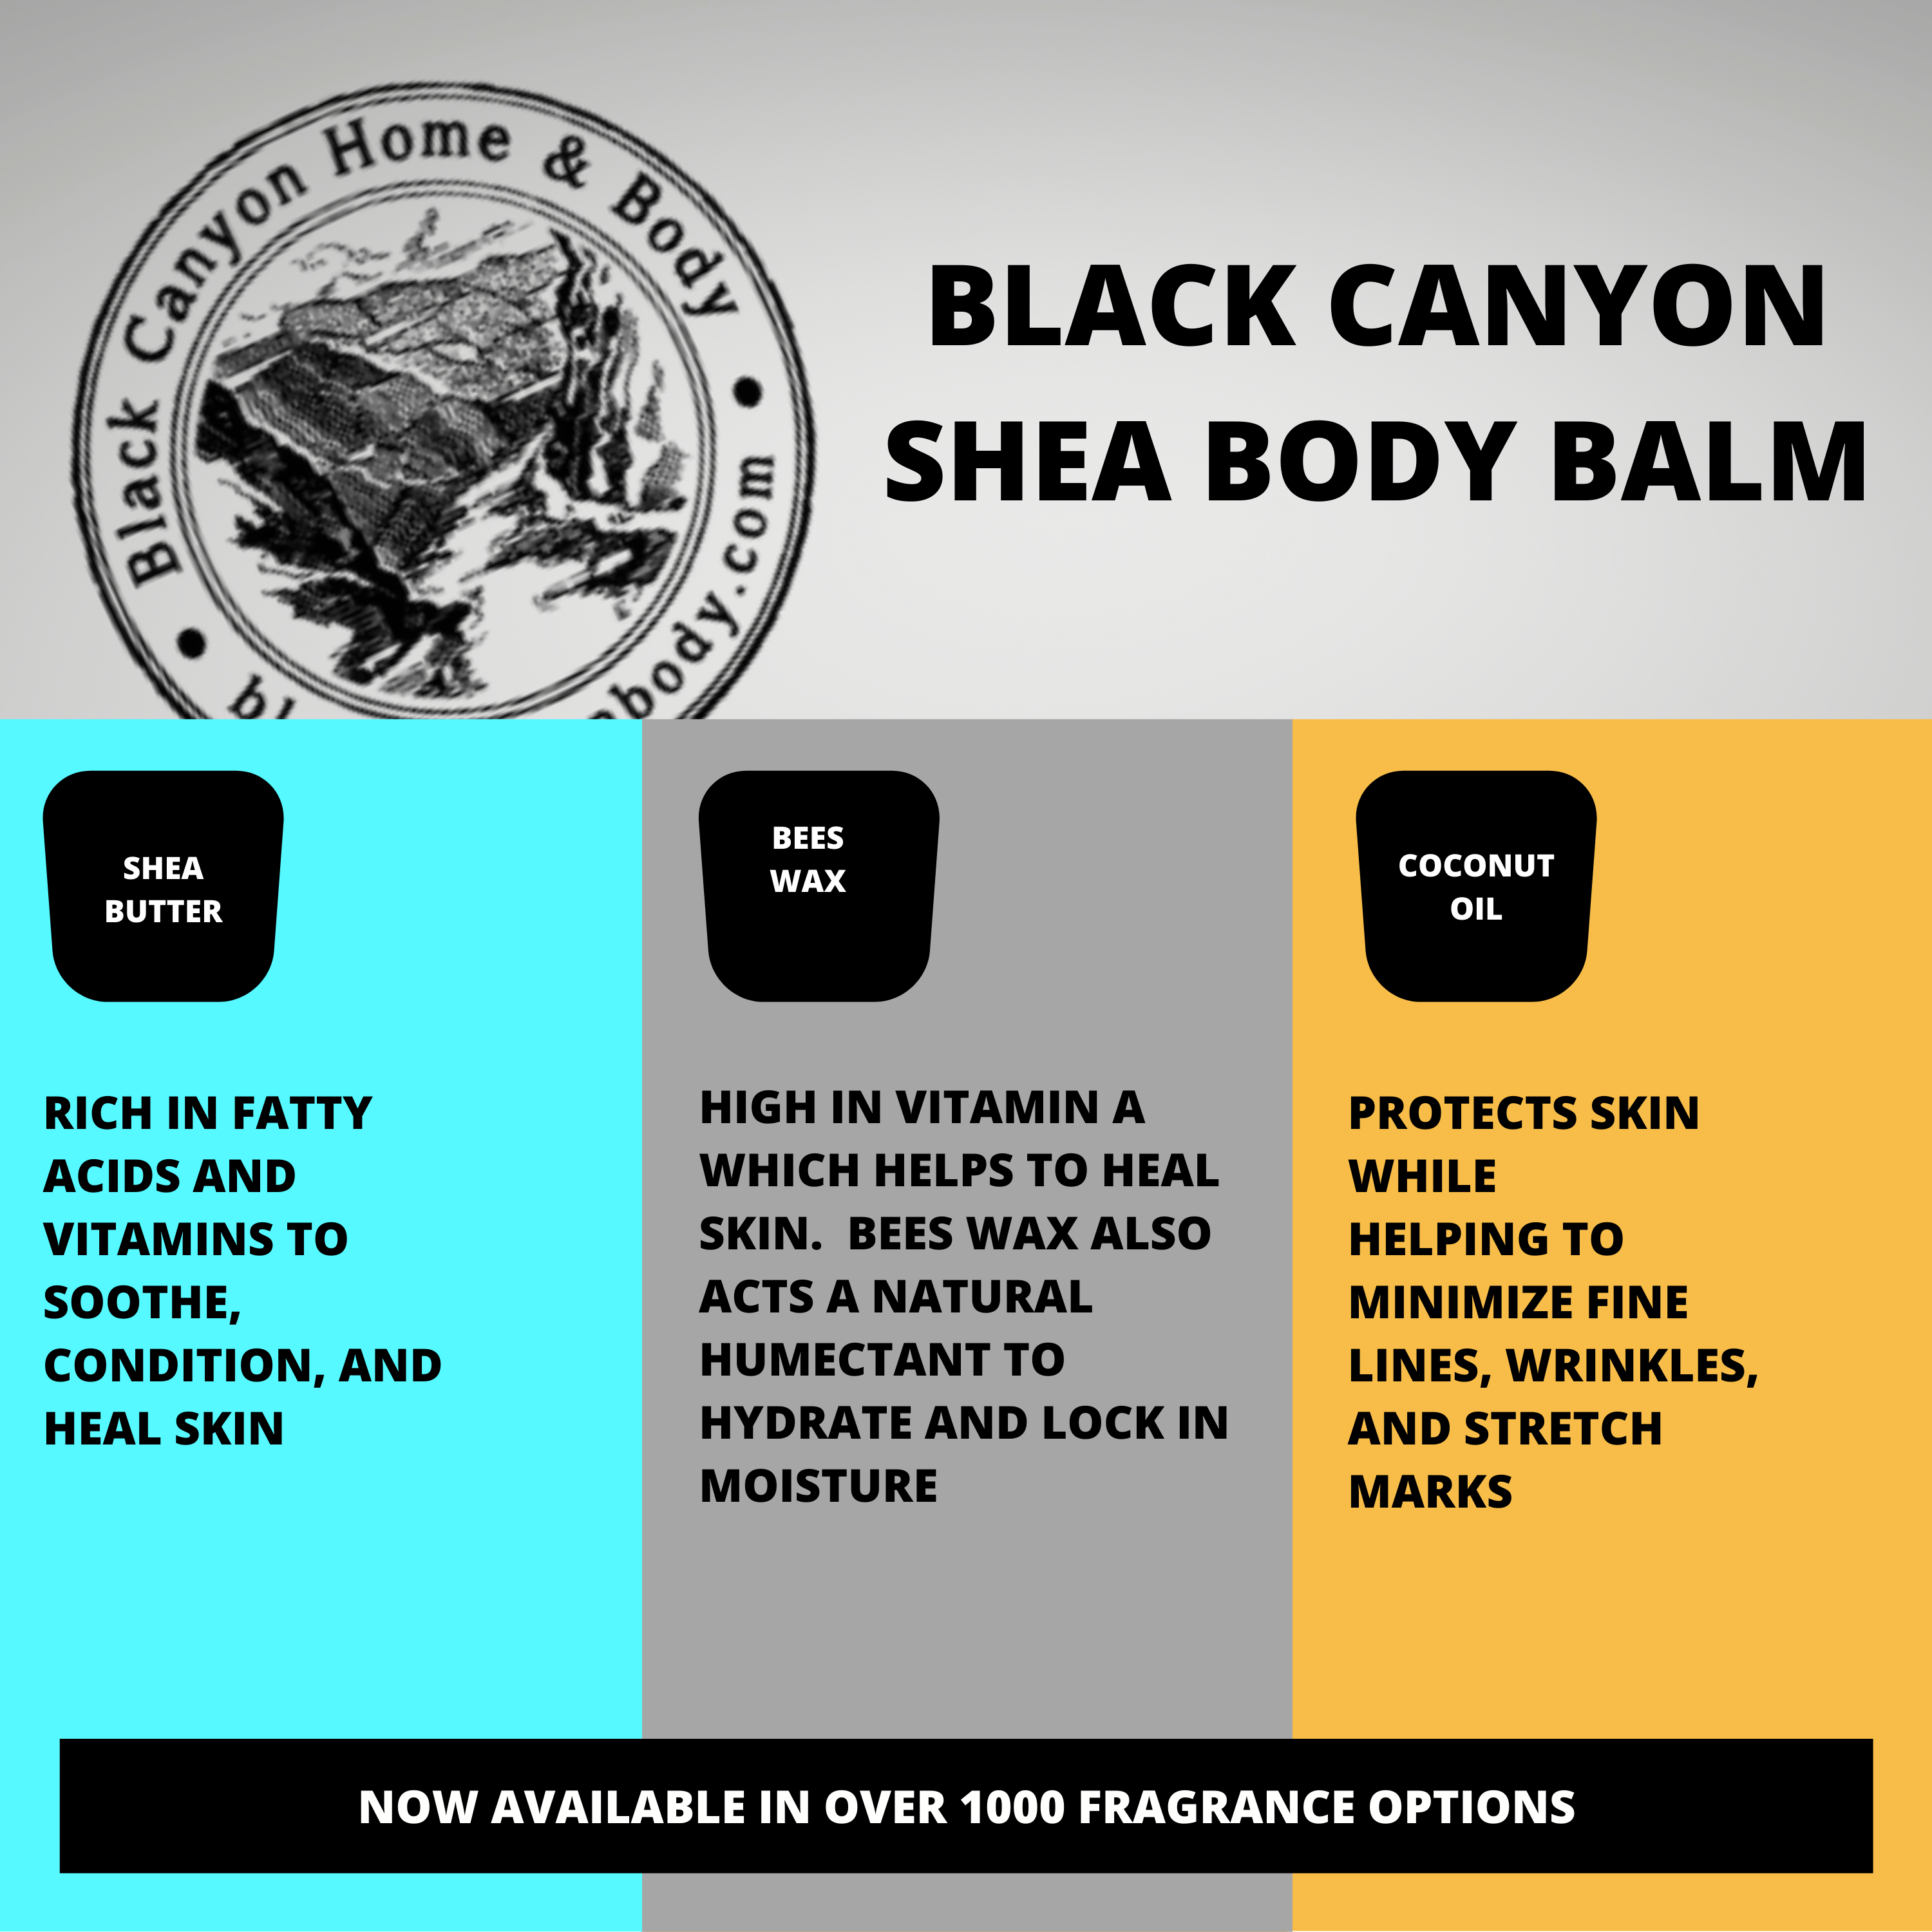 Black Canyon Cookie Dough Scented Natural Body Balm with Shea